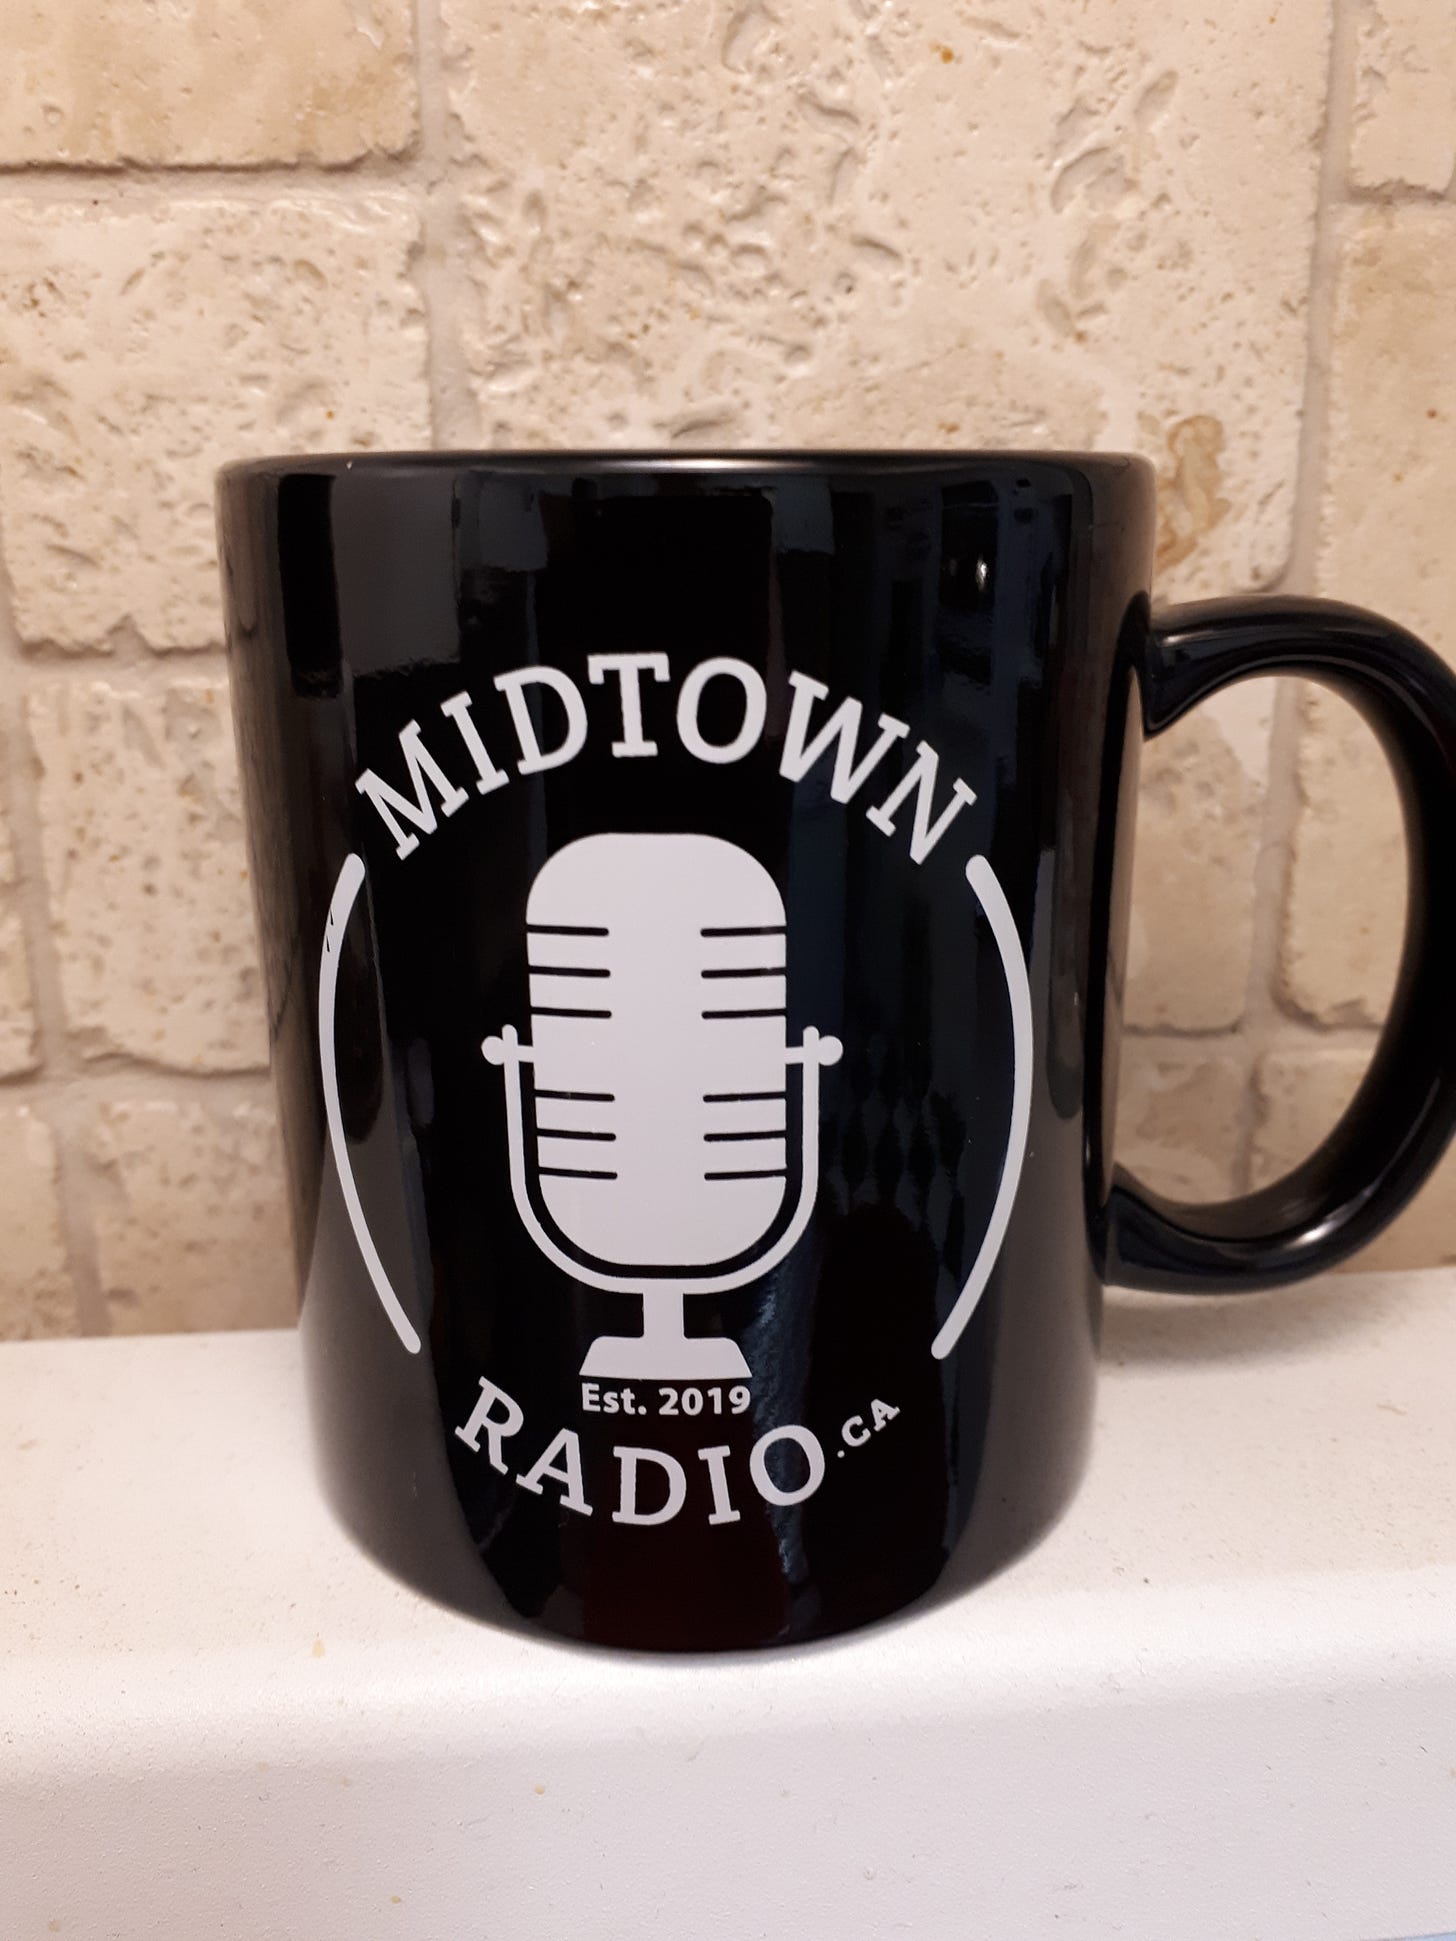 Black mug with white image of an old style radio microphone and white text says Midtown Radio.